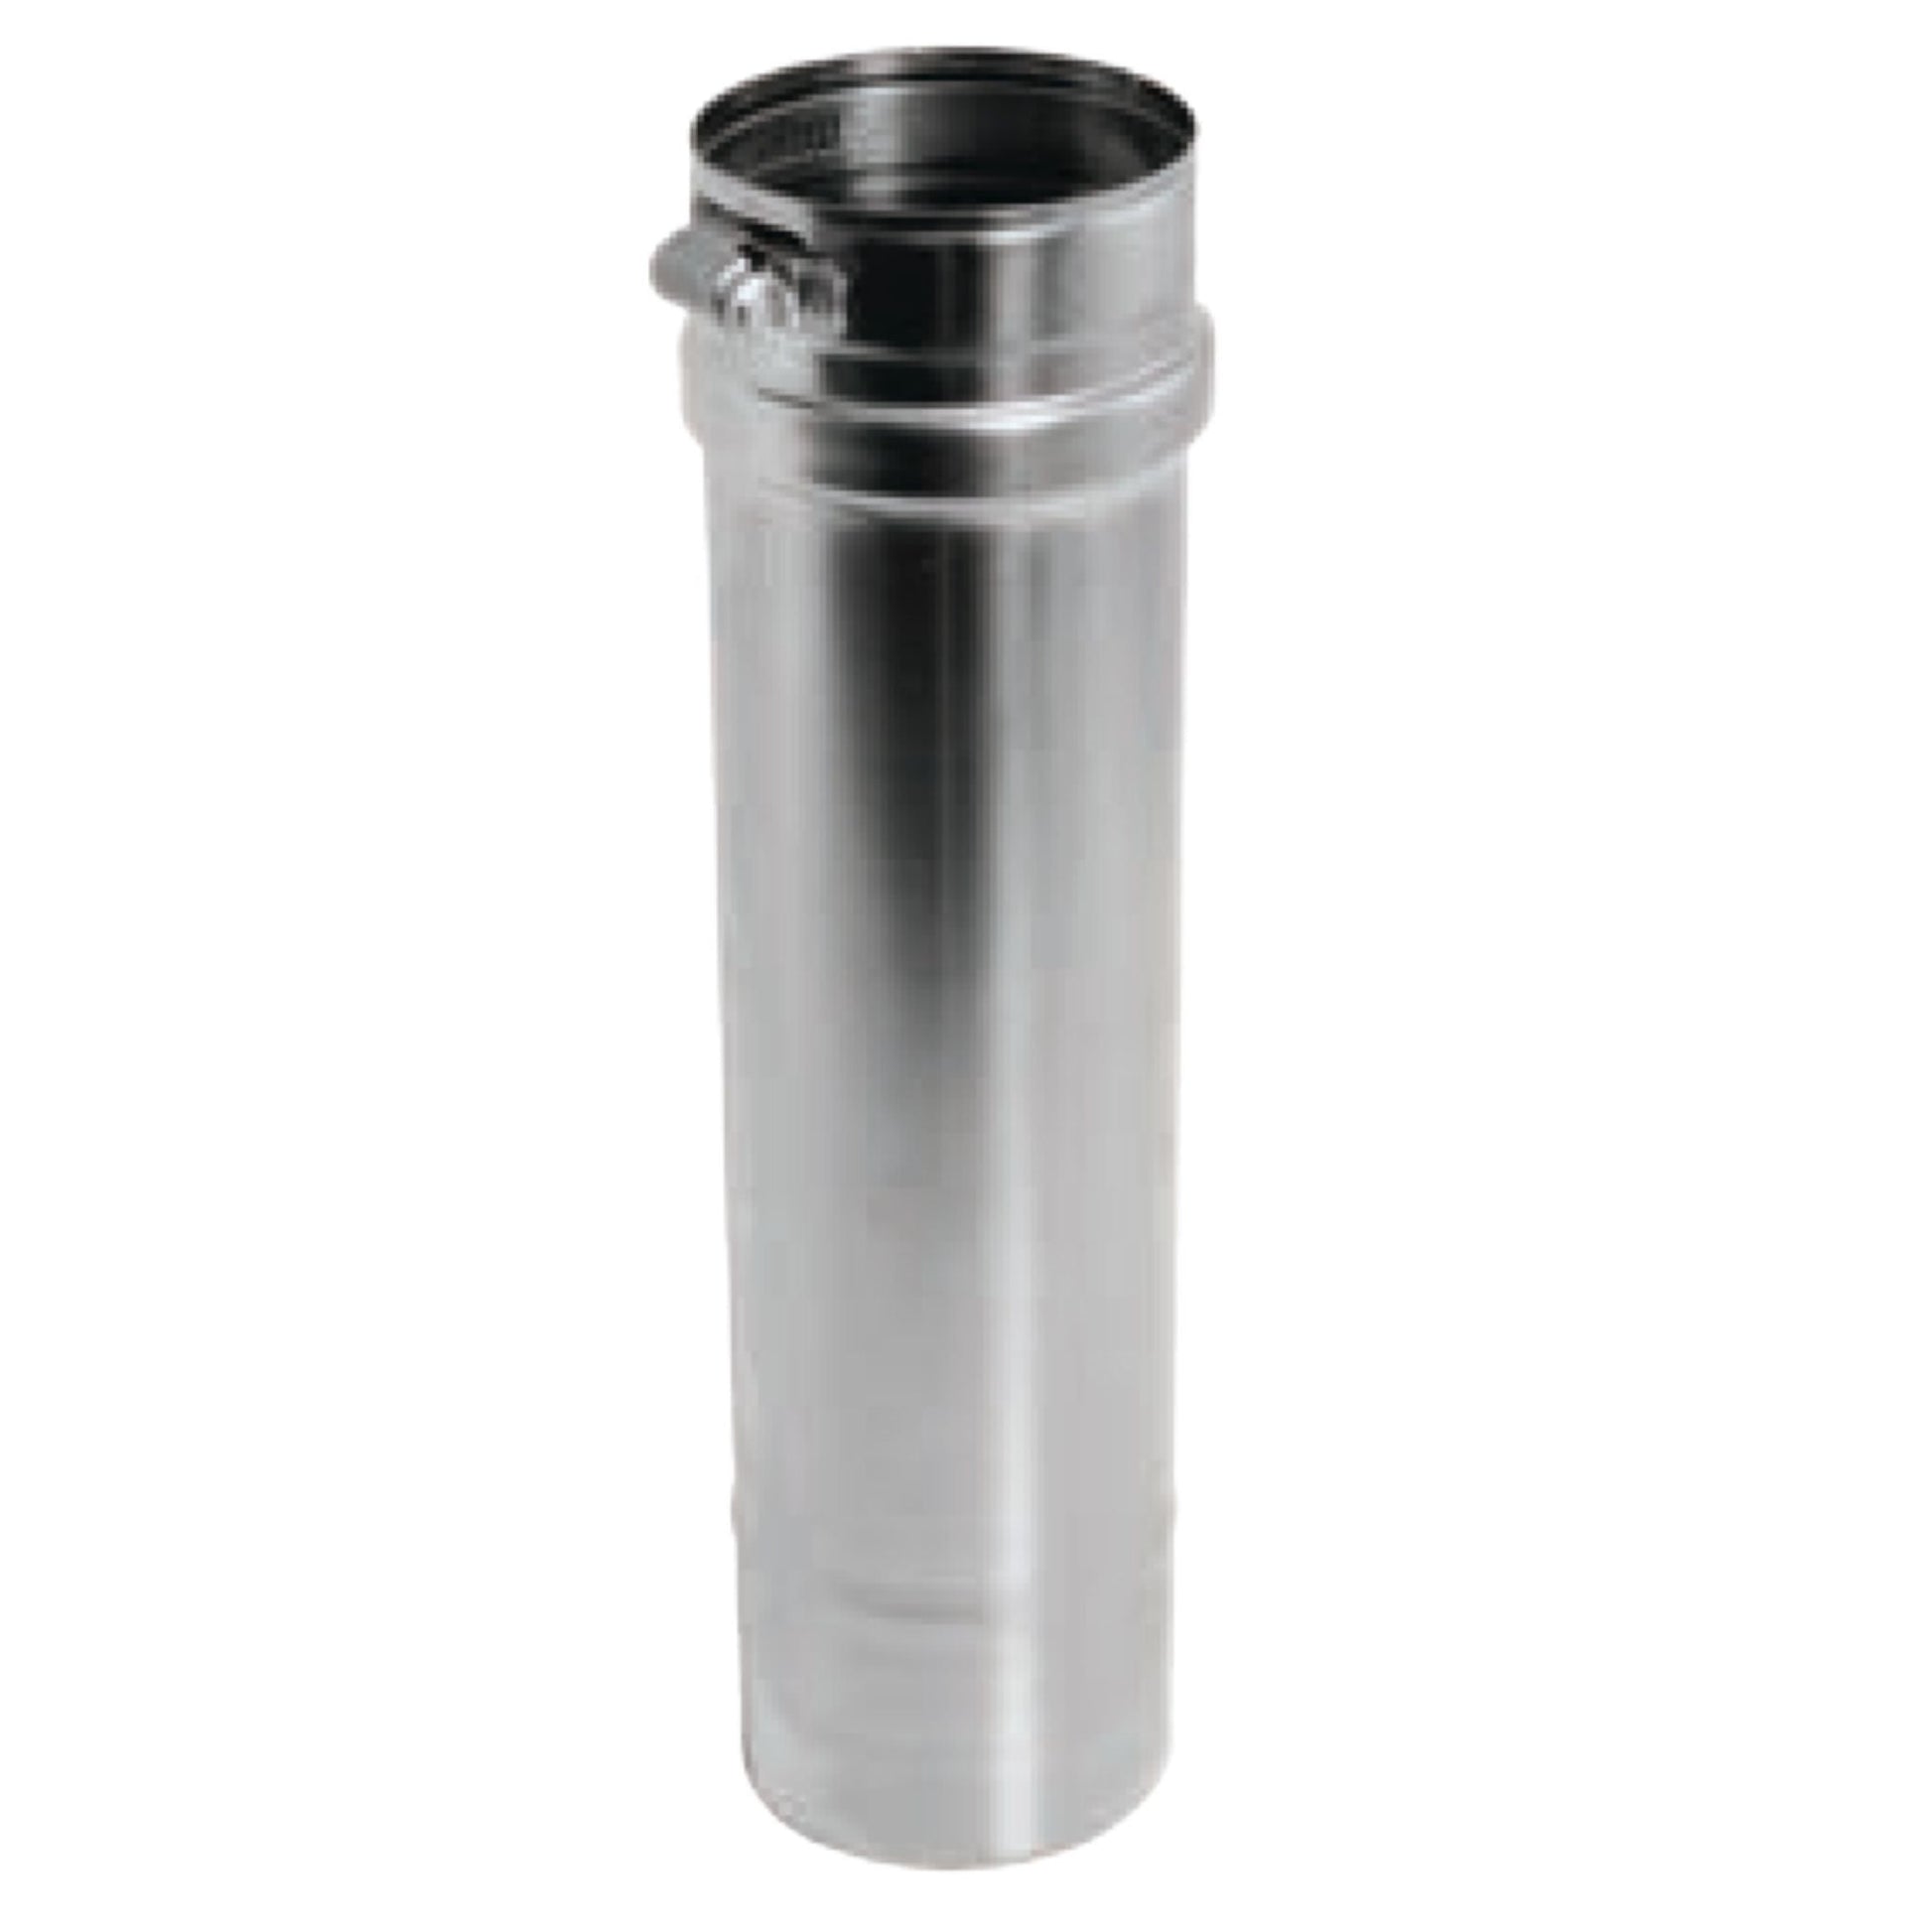 DuraVent FasNSeal 8" x 6" 29-4C Stainless Steel Vent Length